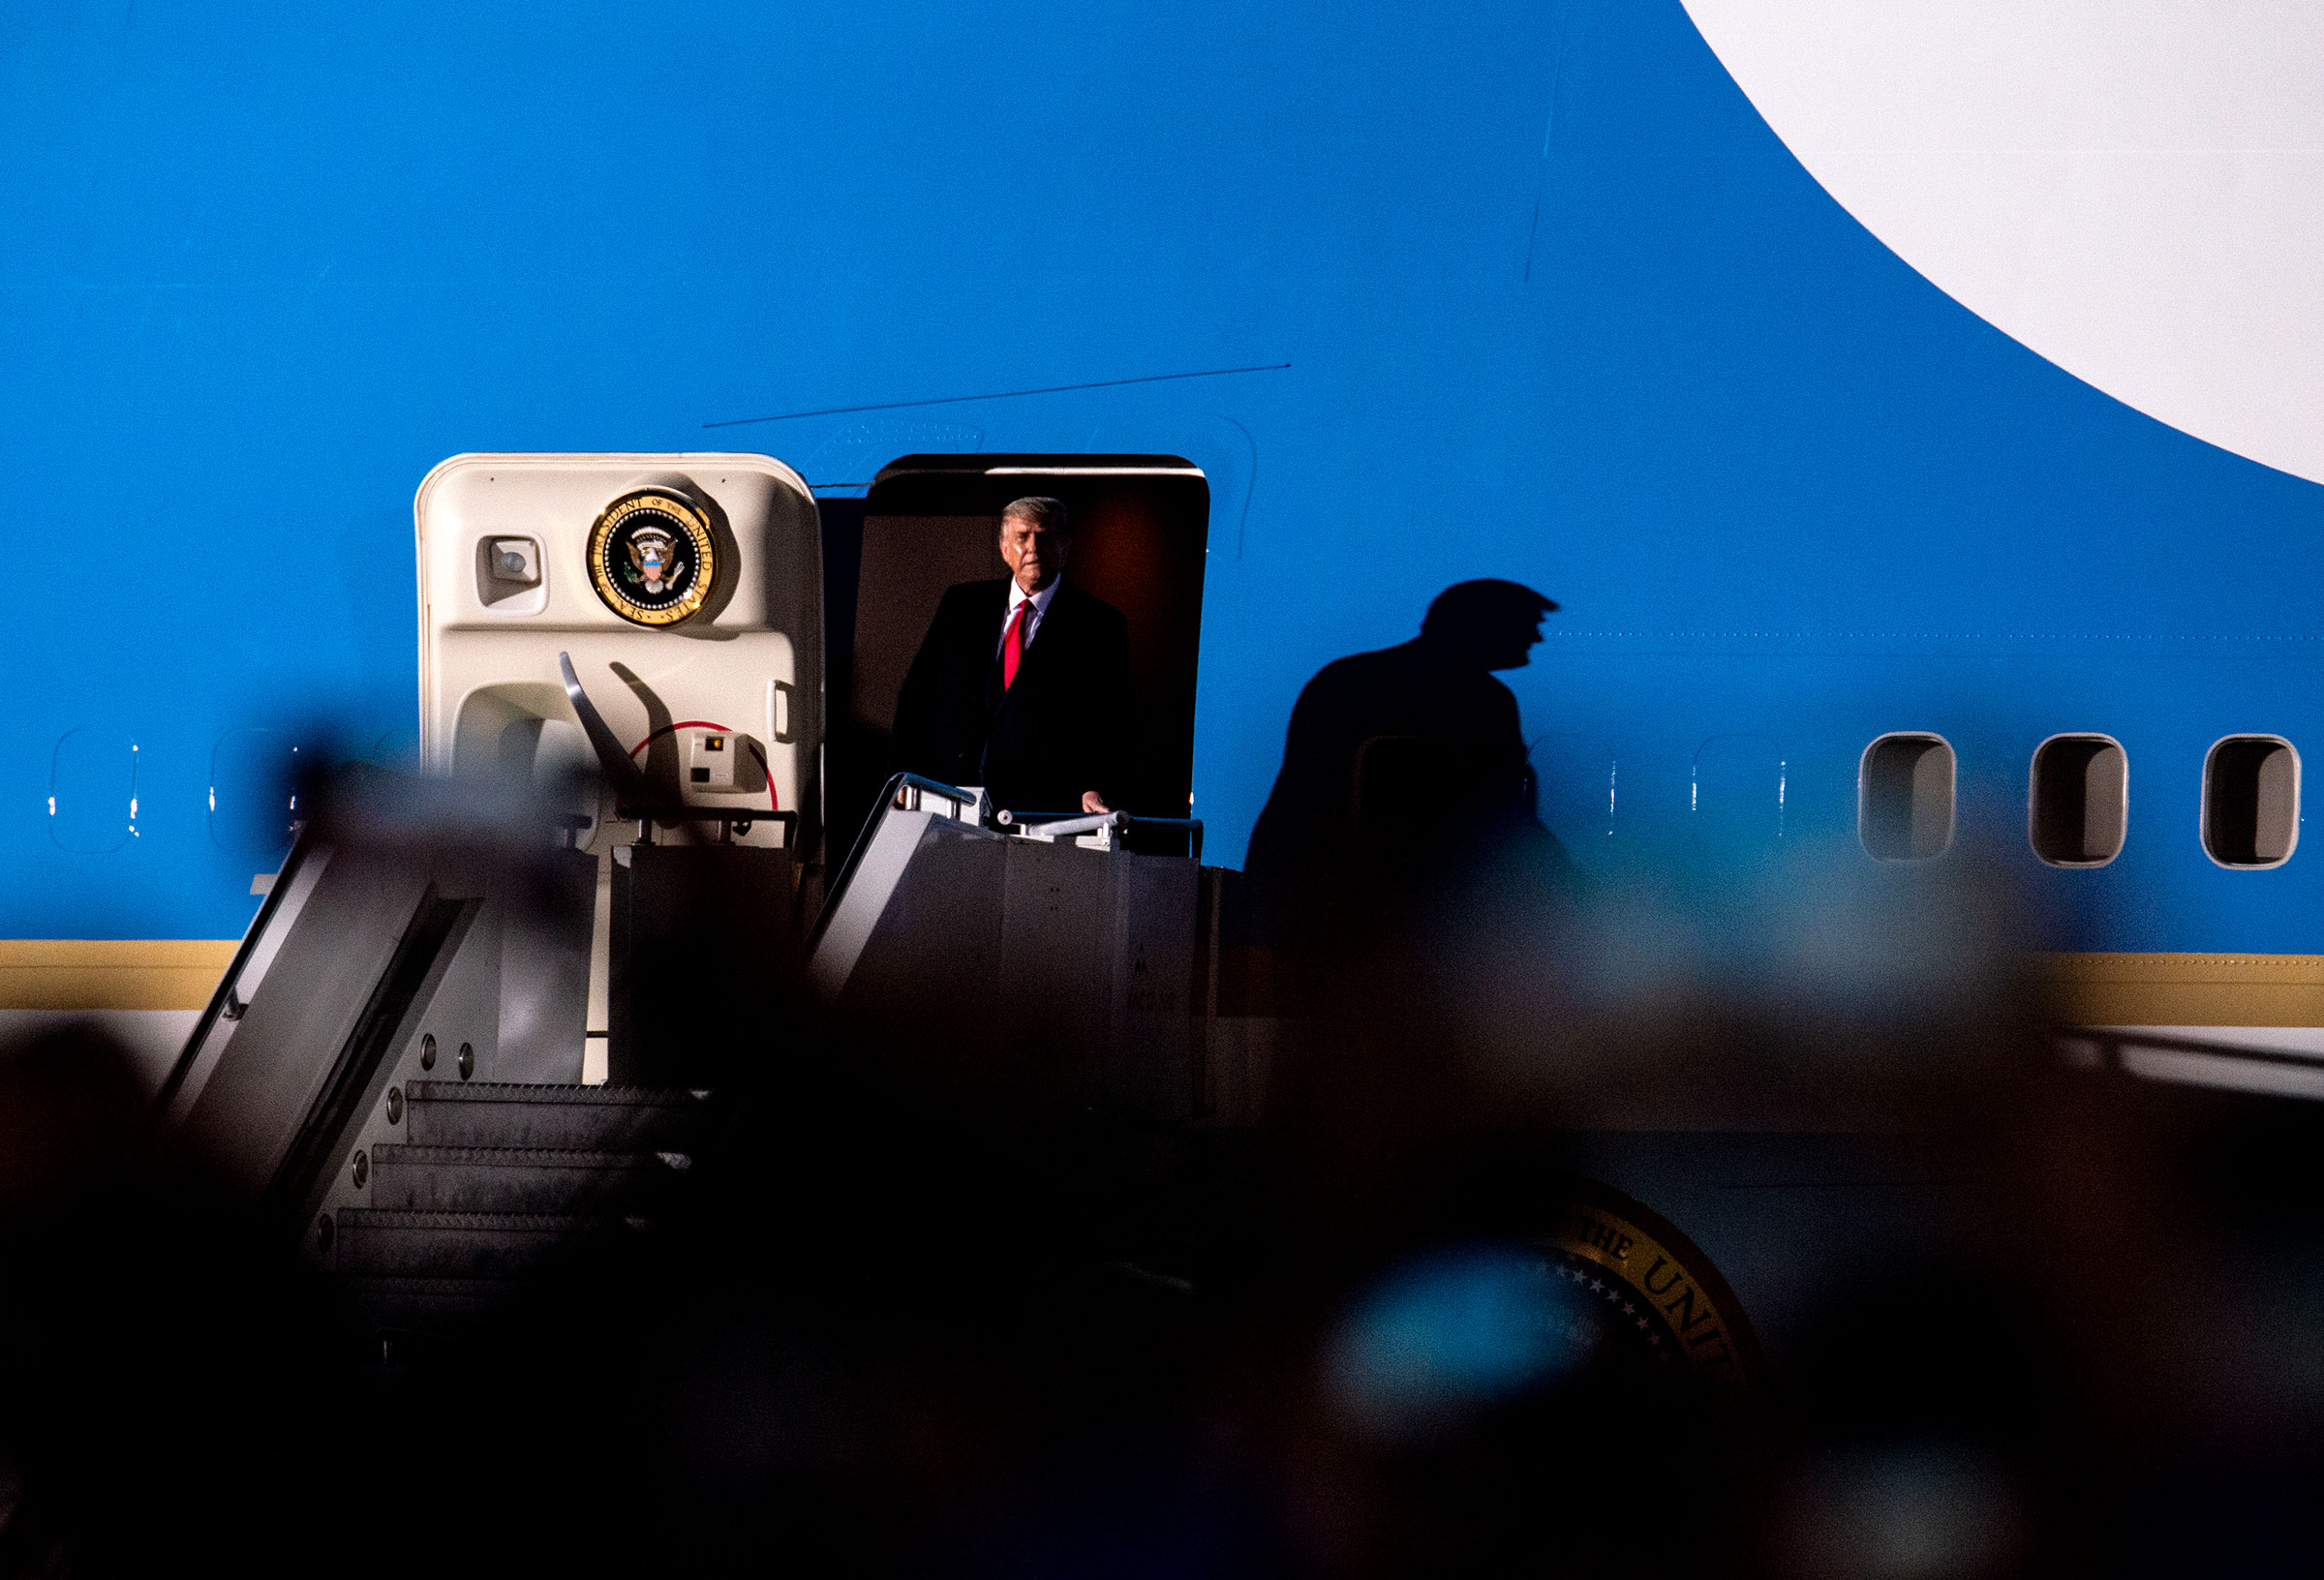 President Donald Trump arrives on Air Force One for a campaign rally at the Duluth International Airport on Sept. 30, 2020 in Duluth, Minnesota. (Stephen Maturen—Getty Images)